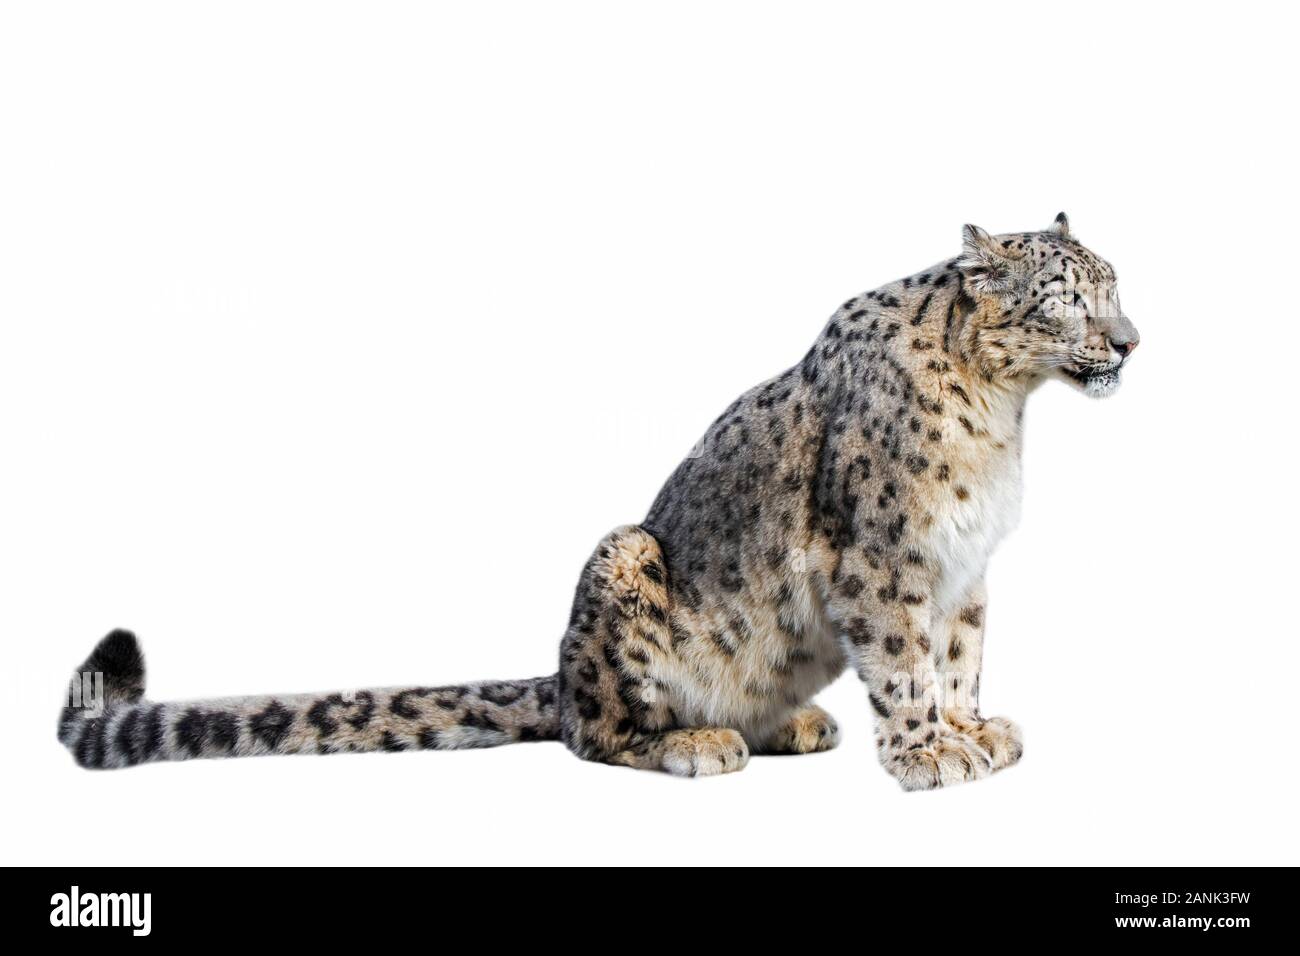 Snow leopard / ounce (Panthera uncia / Uncia uncia) native to the mountain ranges of Central and South Asia against white background Stock Photo